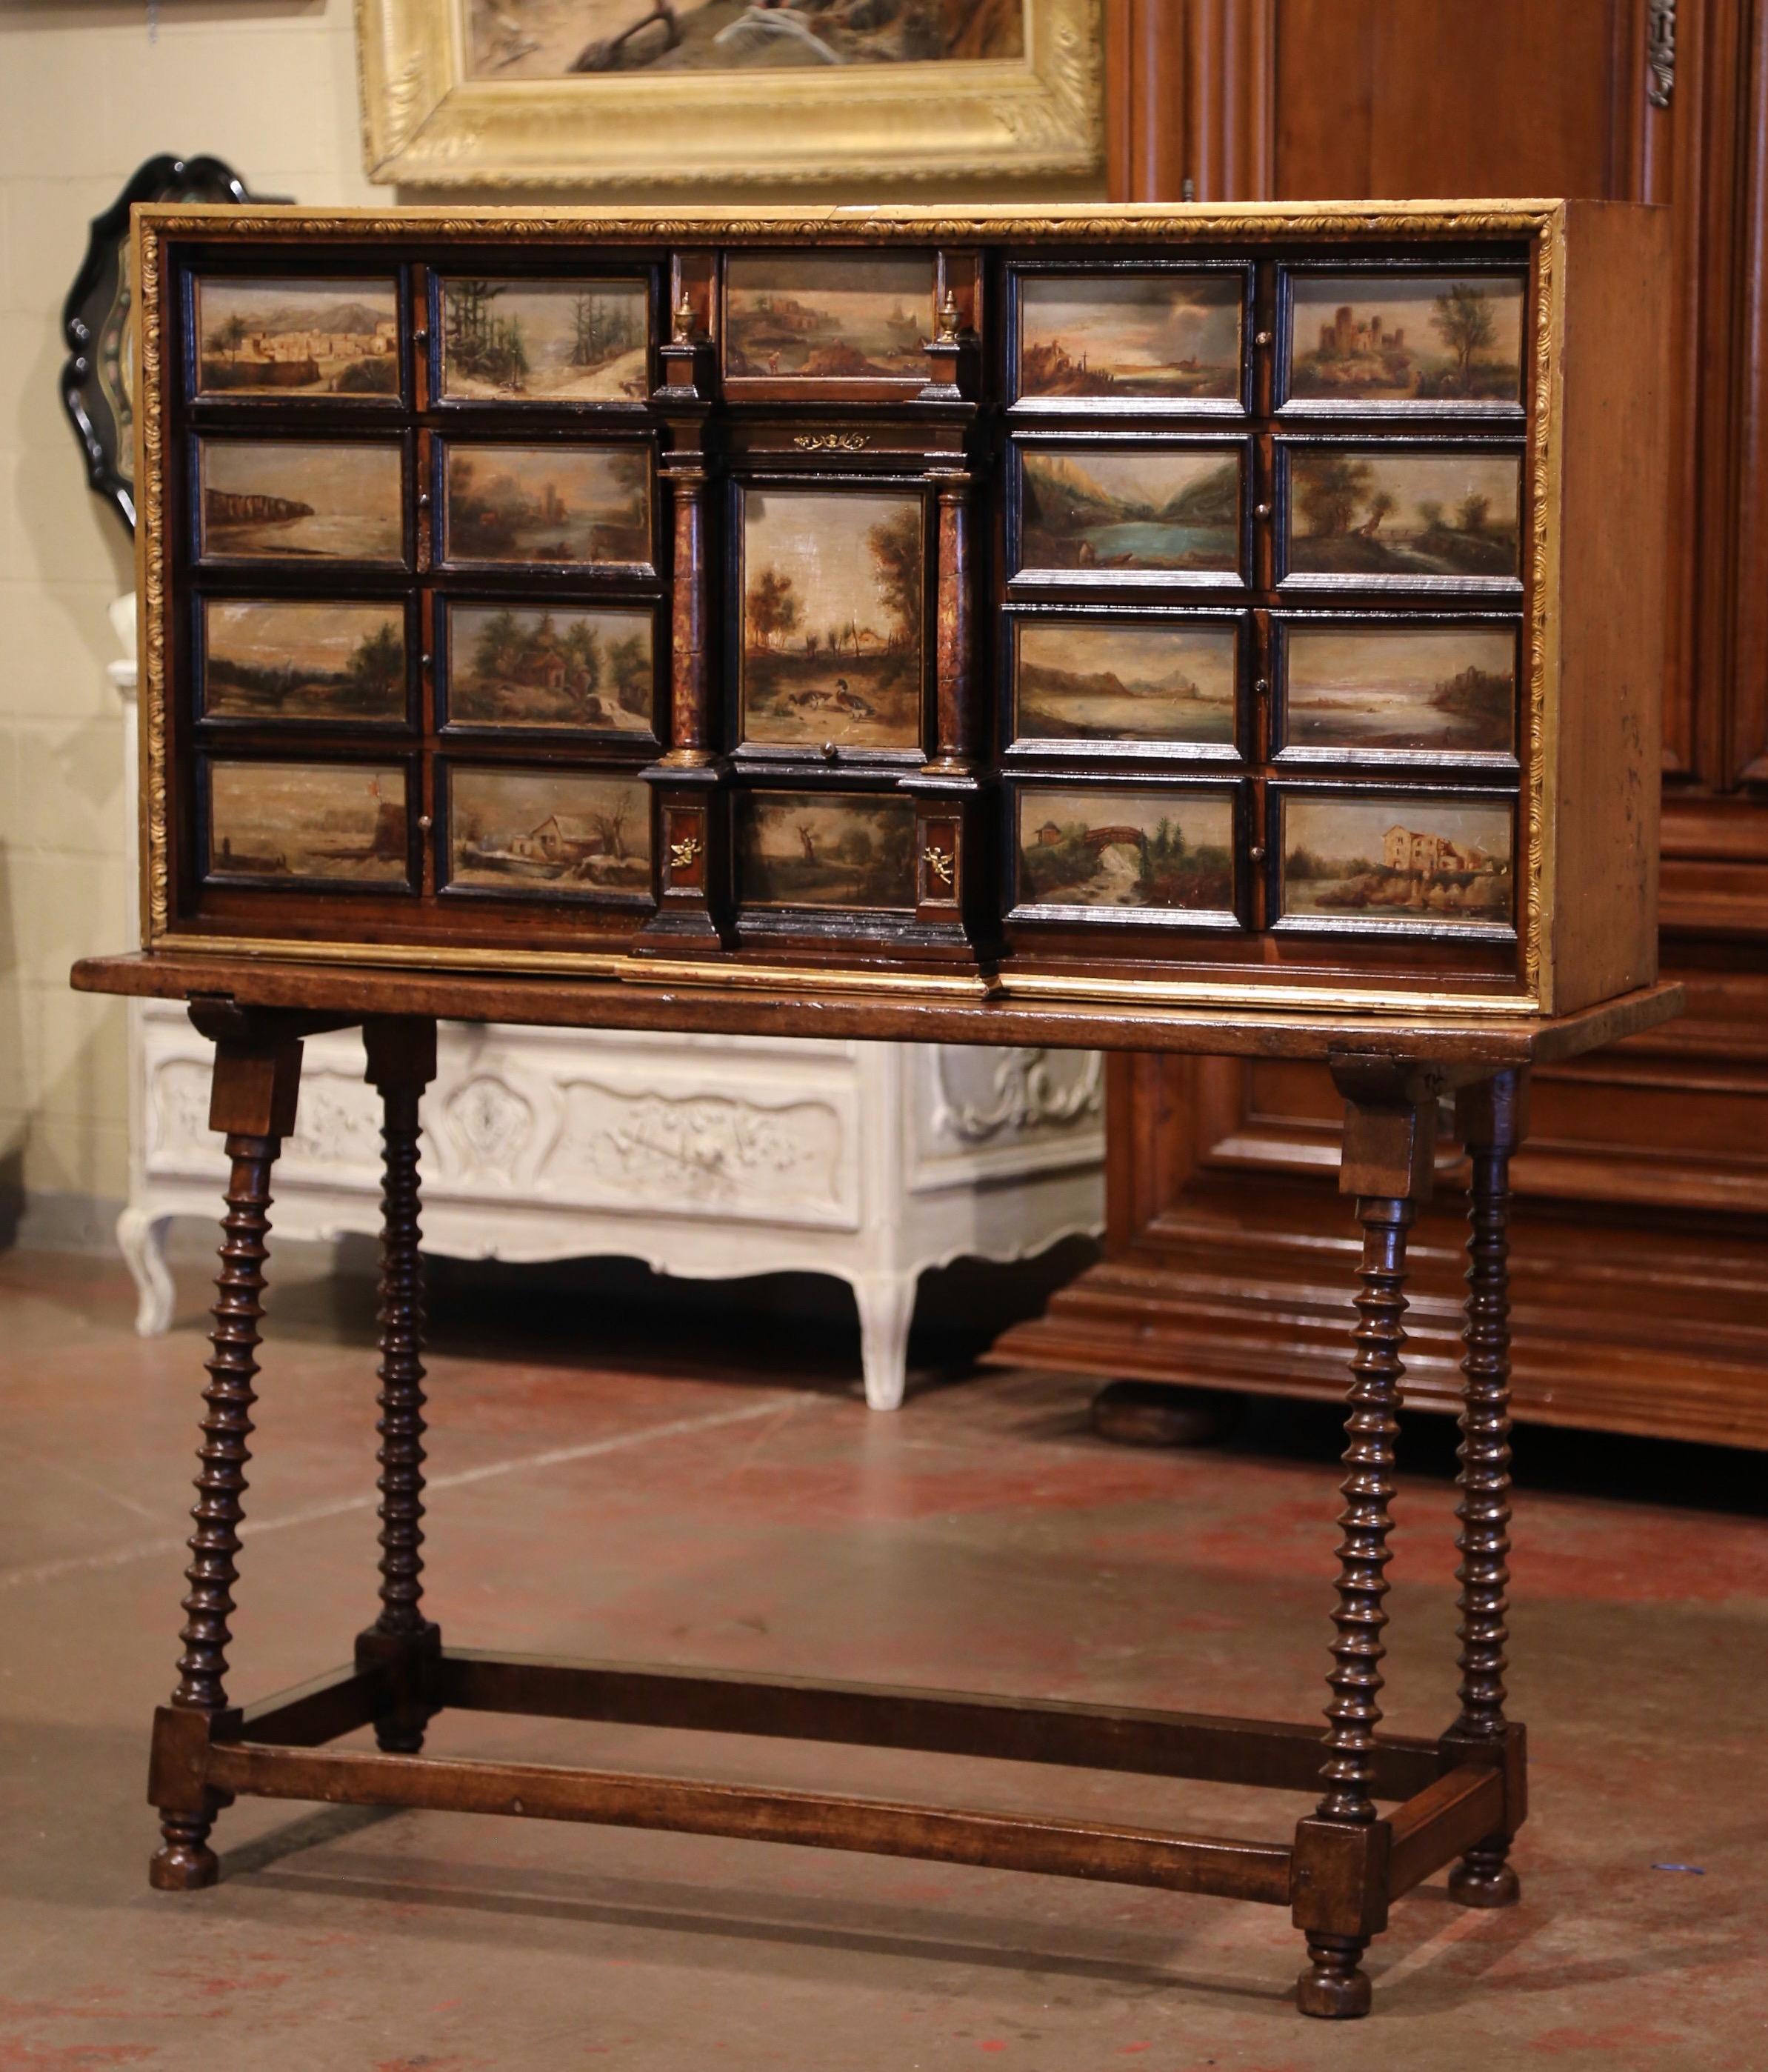 Hand-Painted 19th Century Spanish Walnut Bargueño on Stand with Hand Painted Landscape Scenes